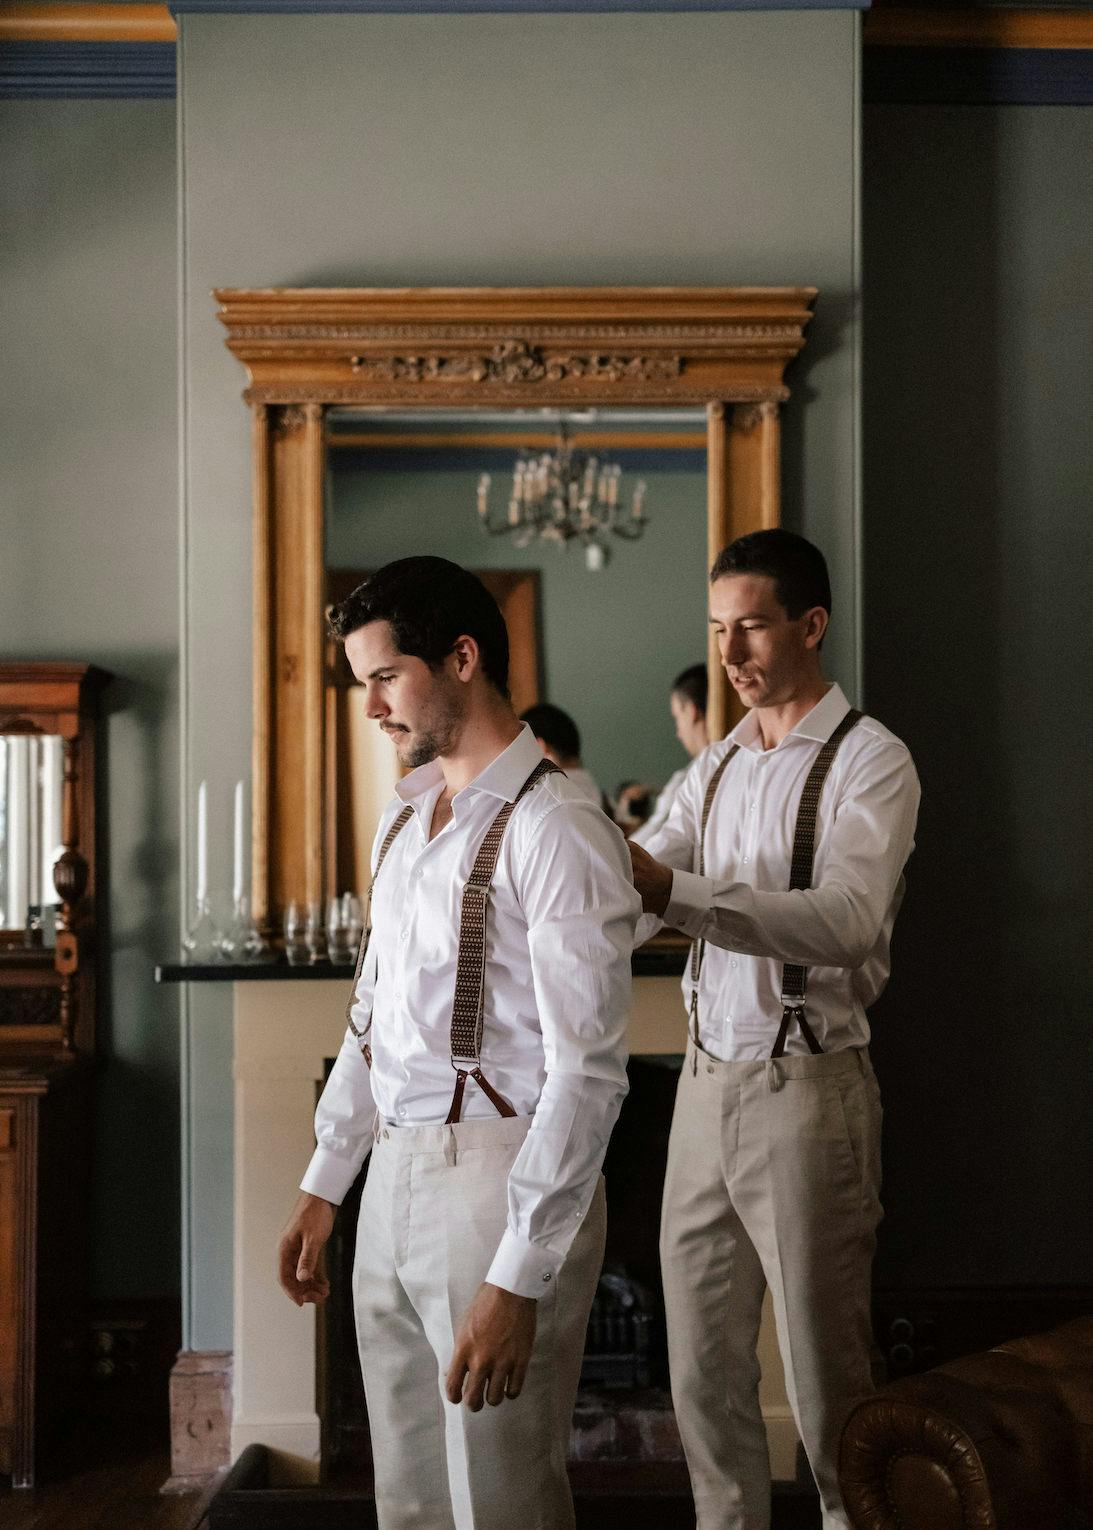 Two men in white shirts are getting ready in a well-decorated room with a large mirror and candles. One adjusts the other's suspenders, ensuring a neat appearance. The room has a classic and elegant decor with a fireplace and wooden furniture.